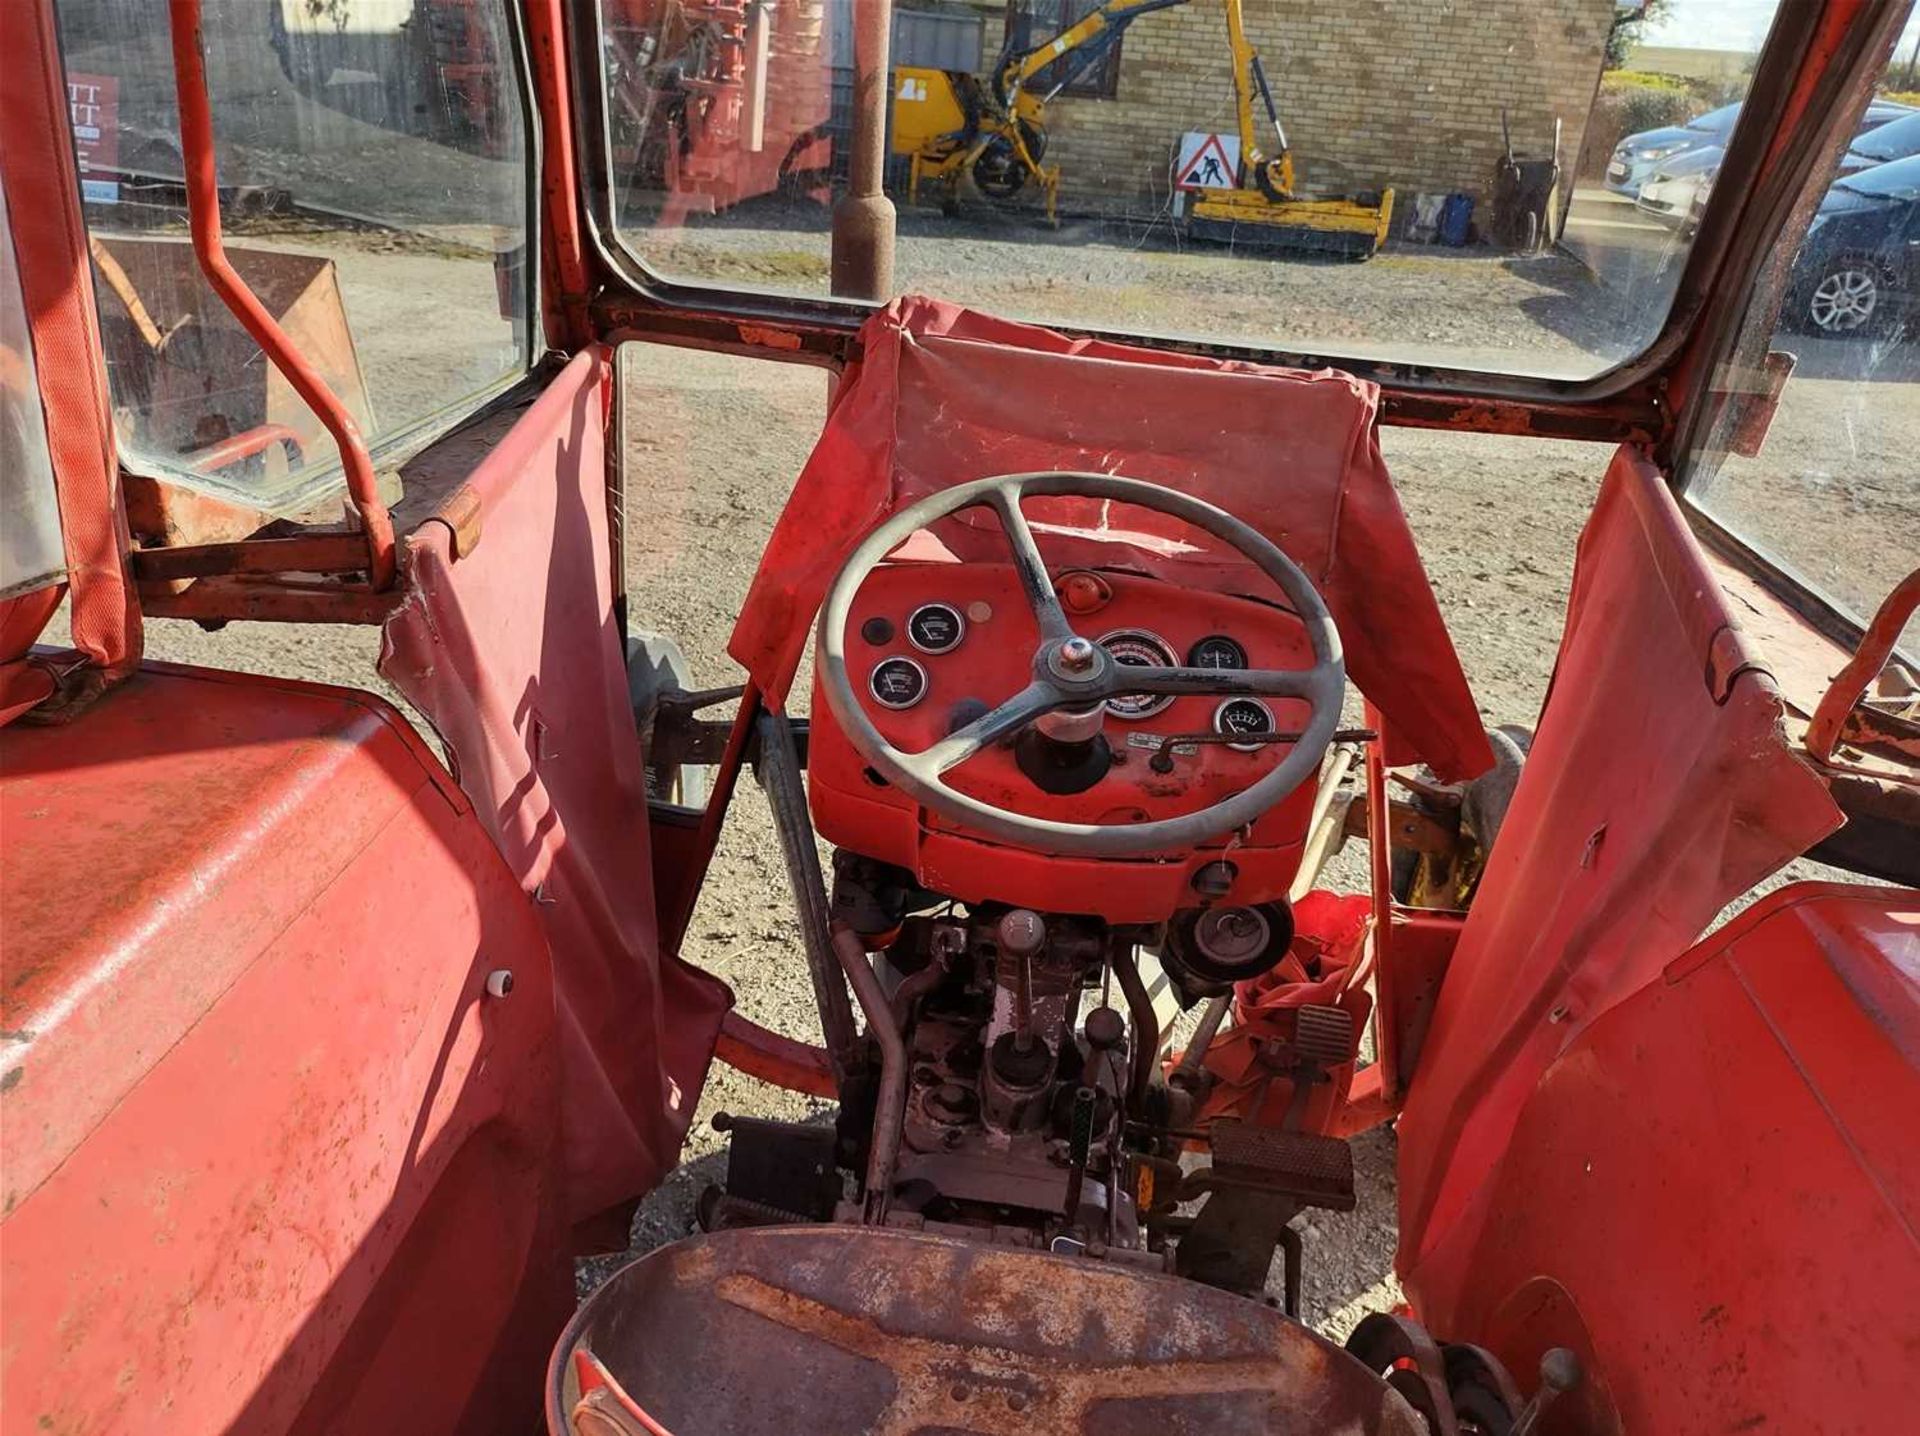 Massey Ferguson 135 Tractor with Original Front Wheels. Pickup Hitch. 2,284 Hrs. Reg: 7JE 705X - Image 6 of 10